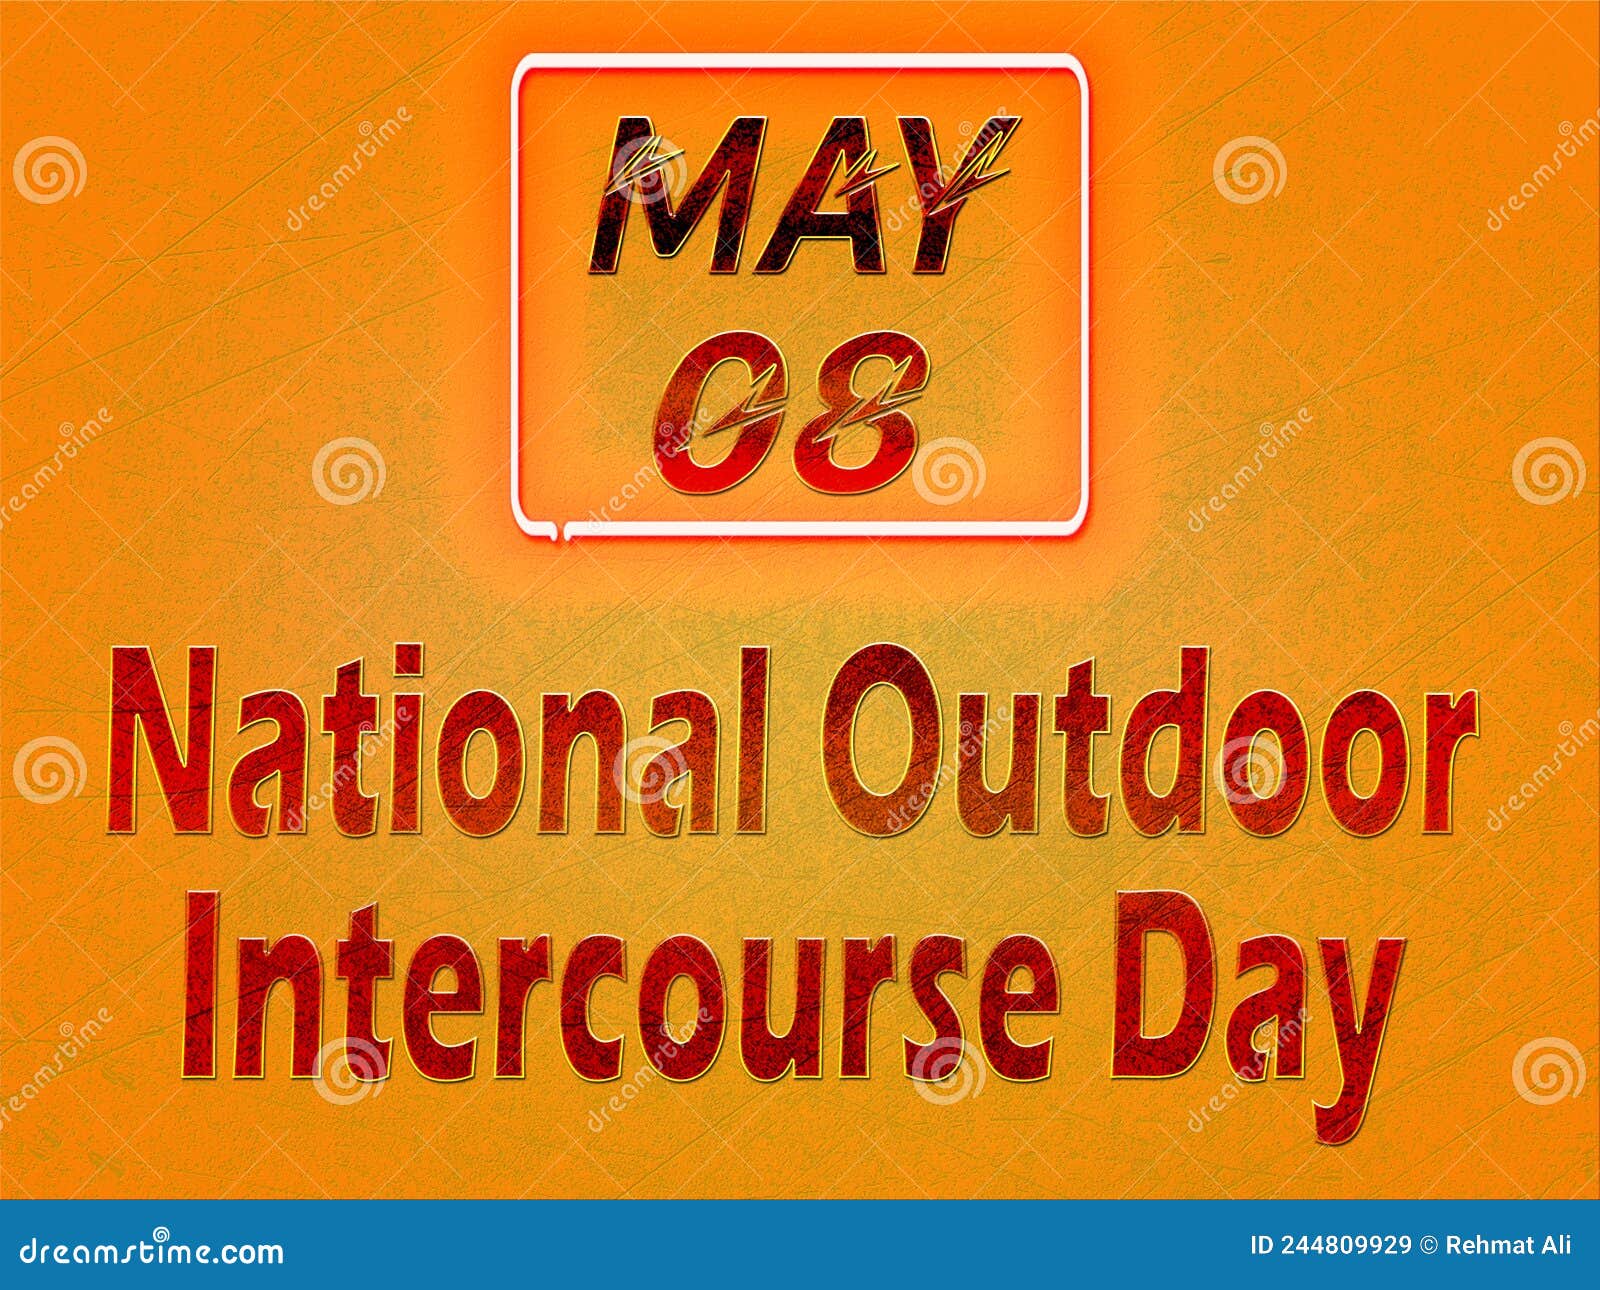 08 May, National Outdoor Intercourse Day, Text Effect on Orange